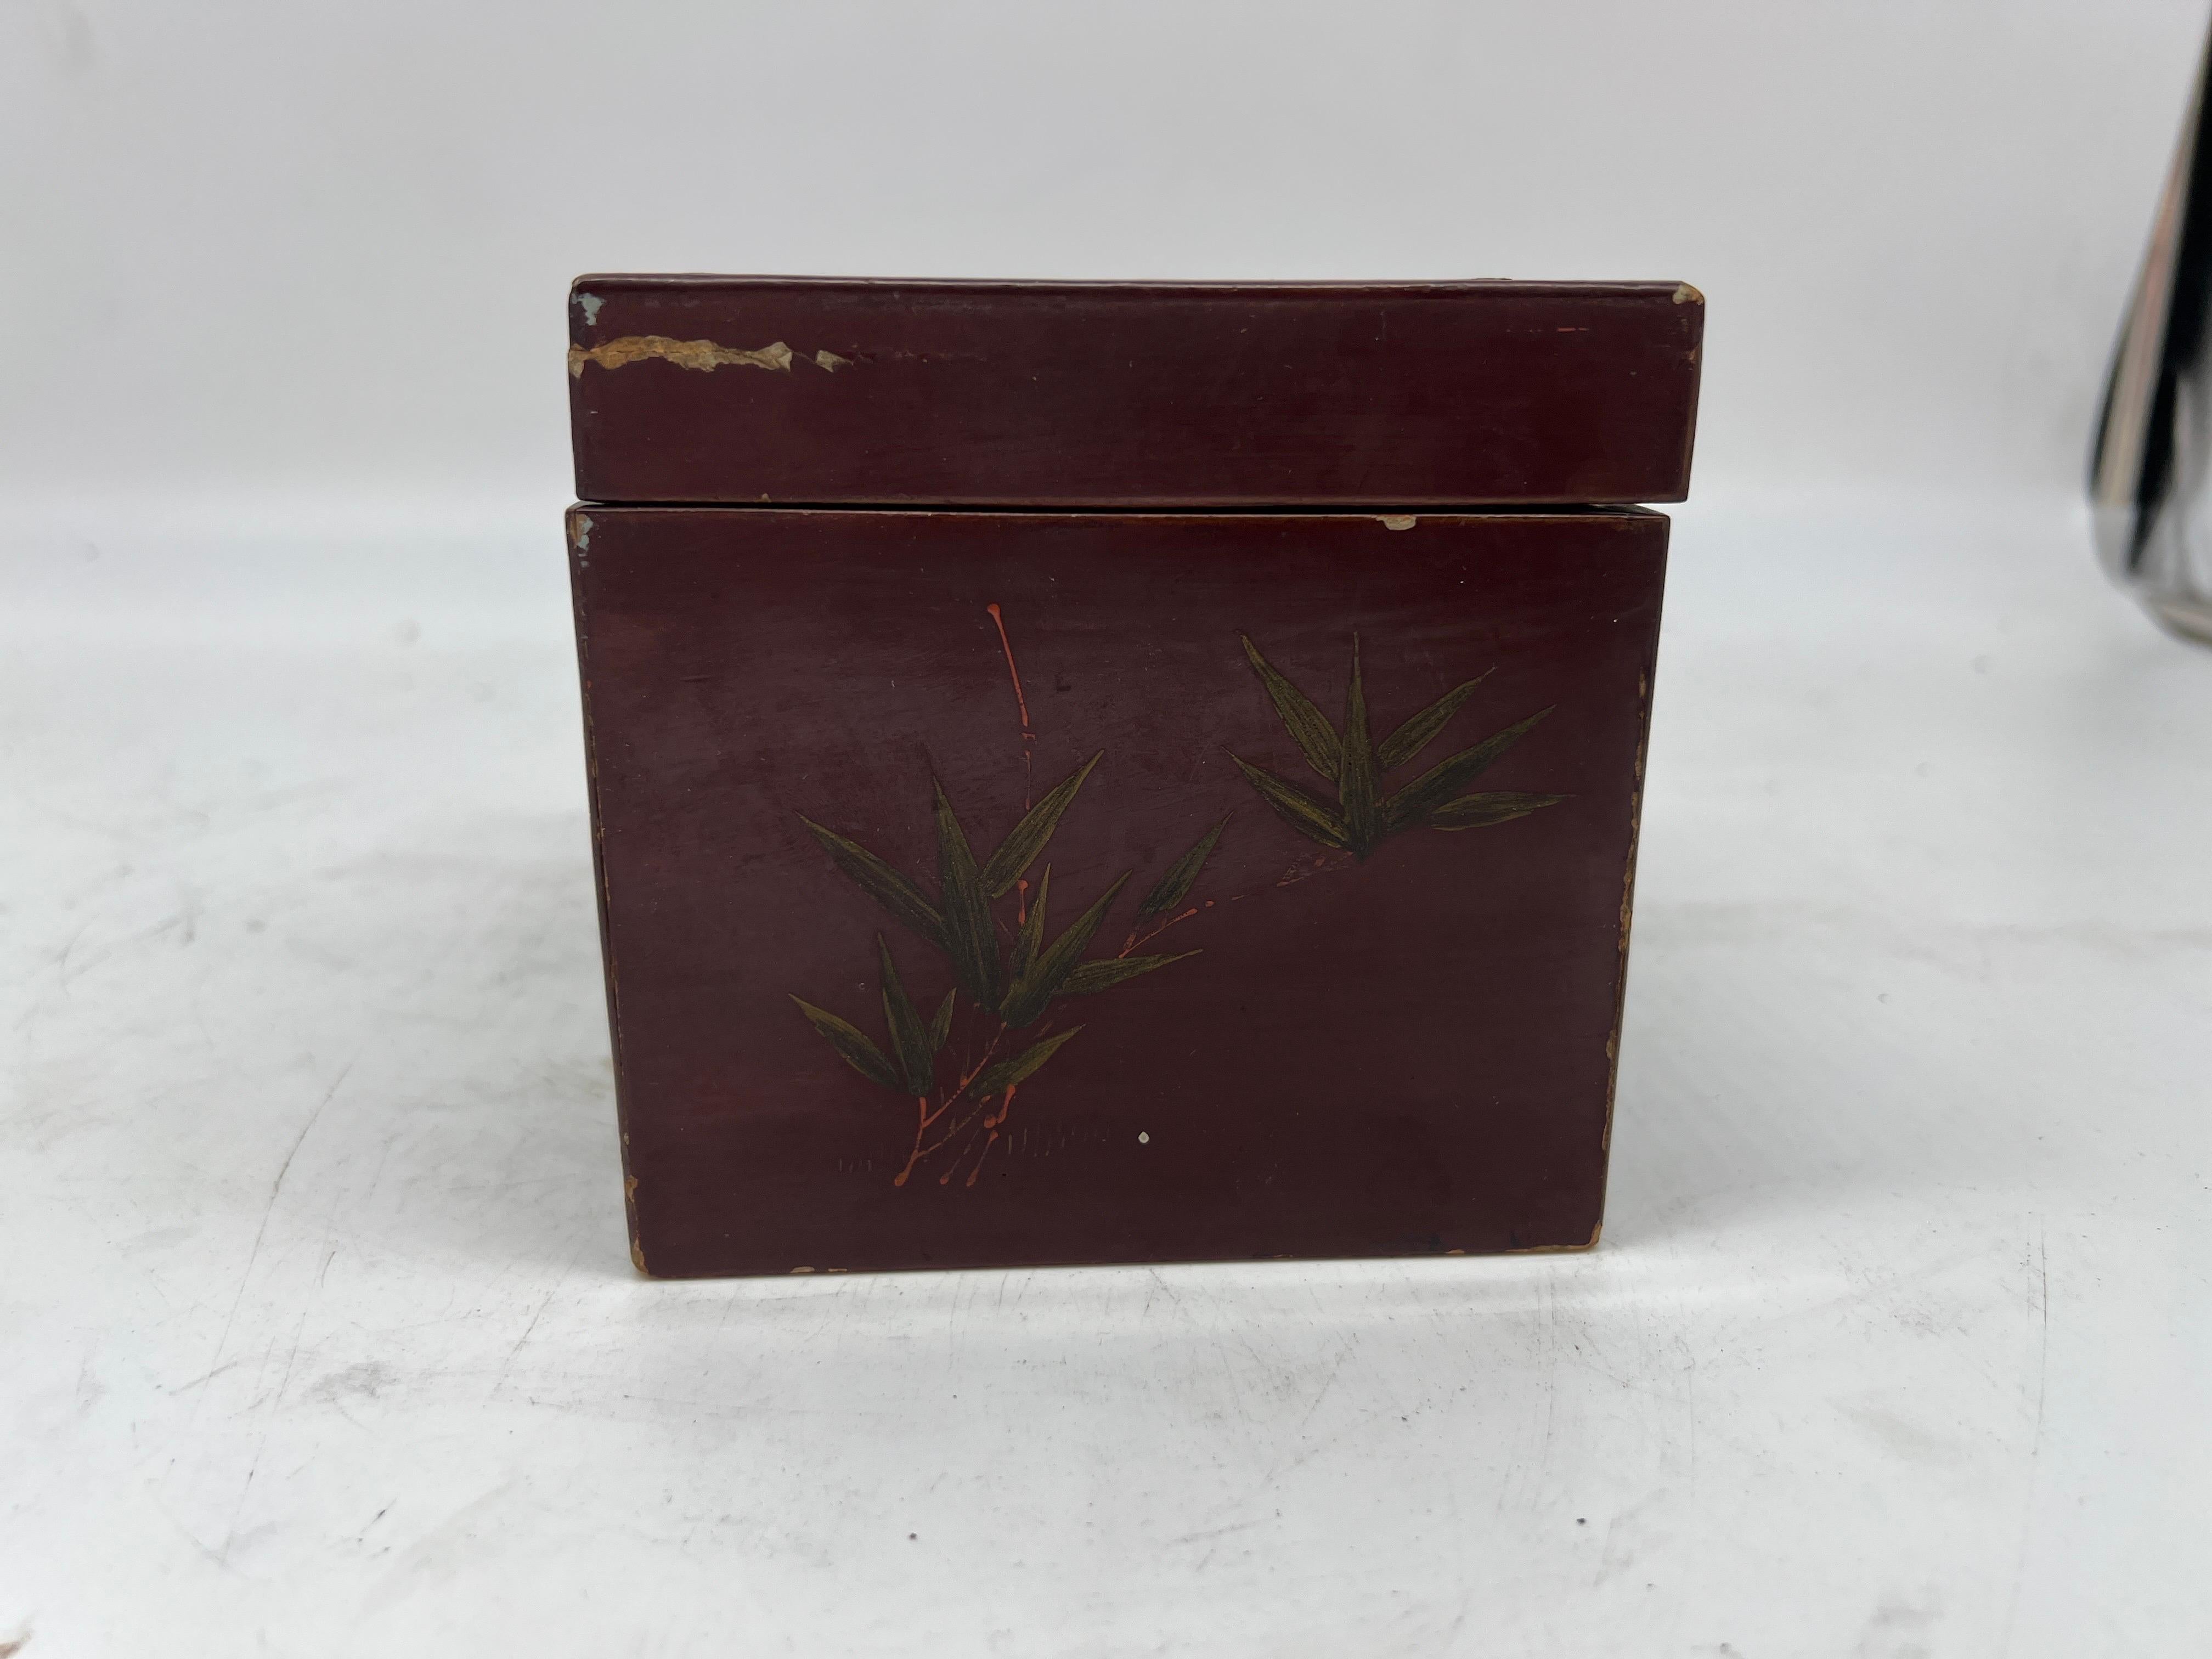 Ying Mee & Co., Antique Chinese Lacquer Tea Caddy or Box For Sale 3